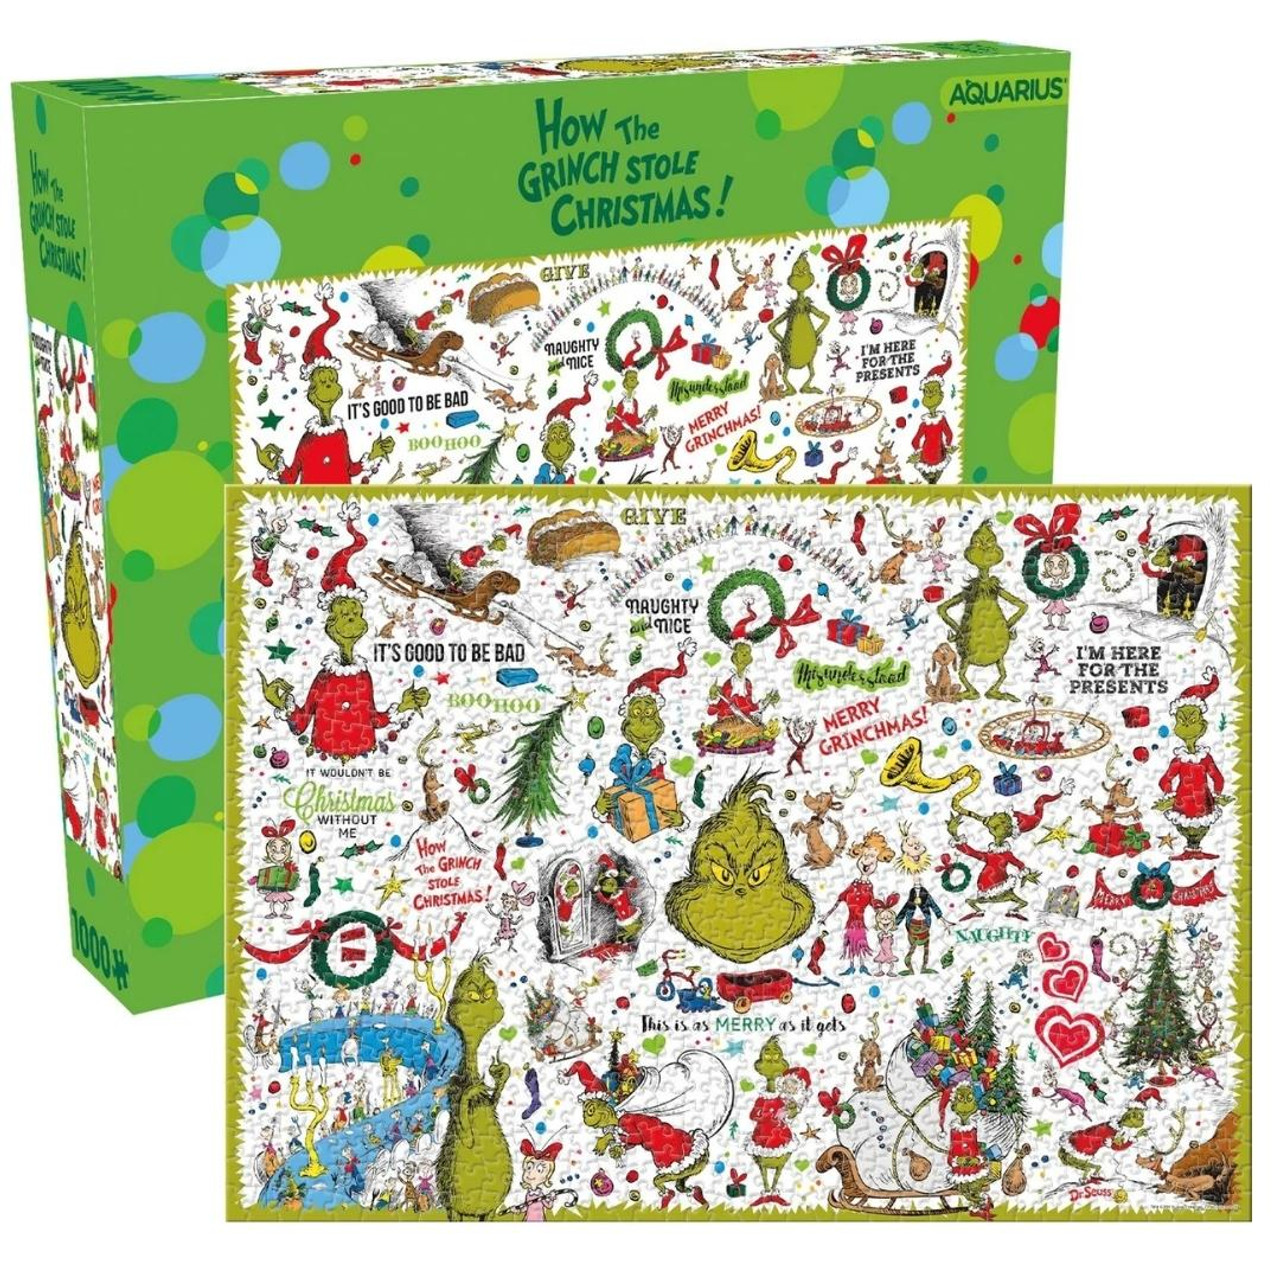 Grinch Christmas Puzzle - 1000 pc